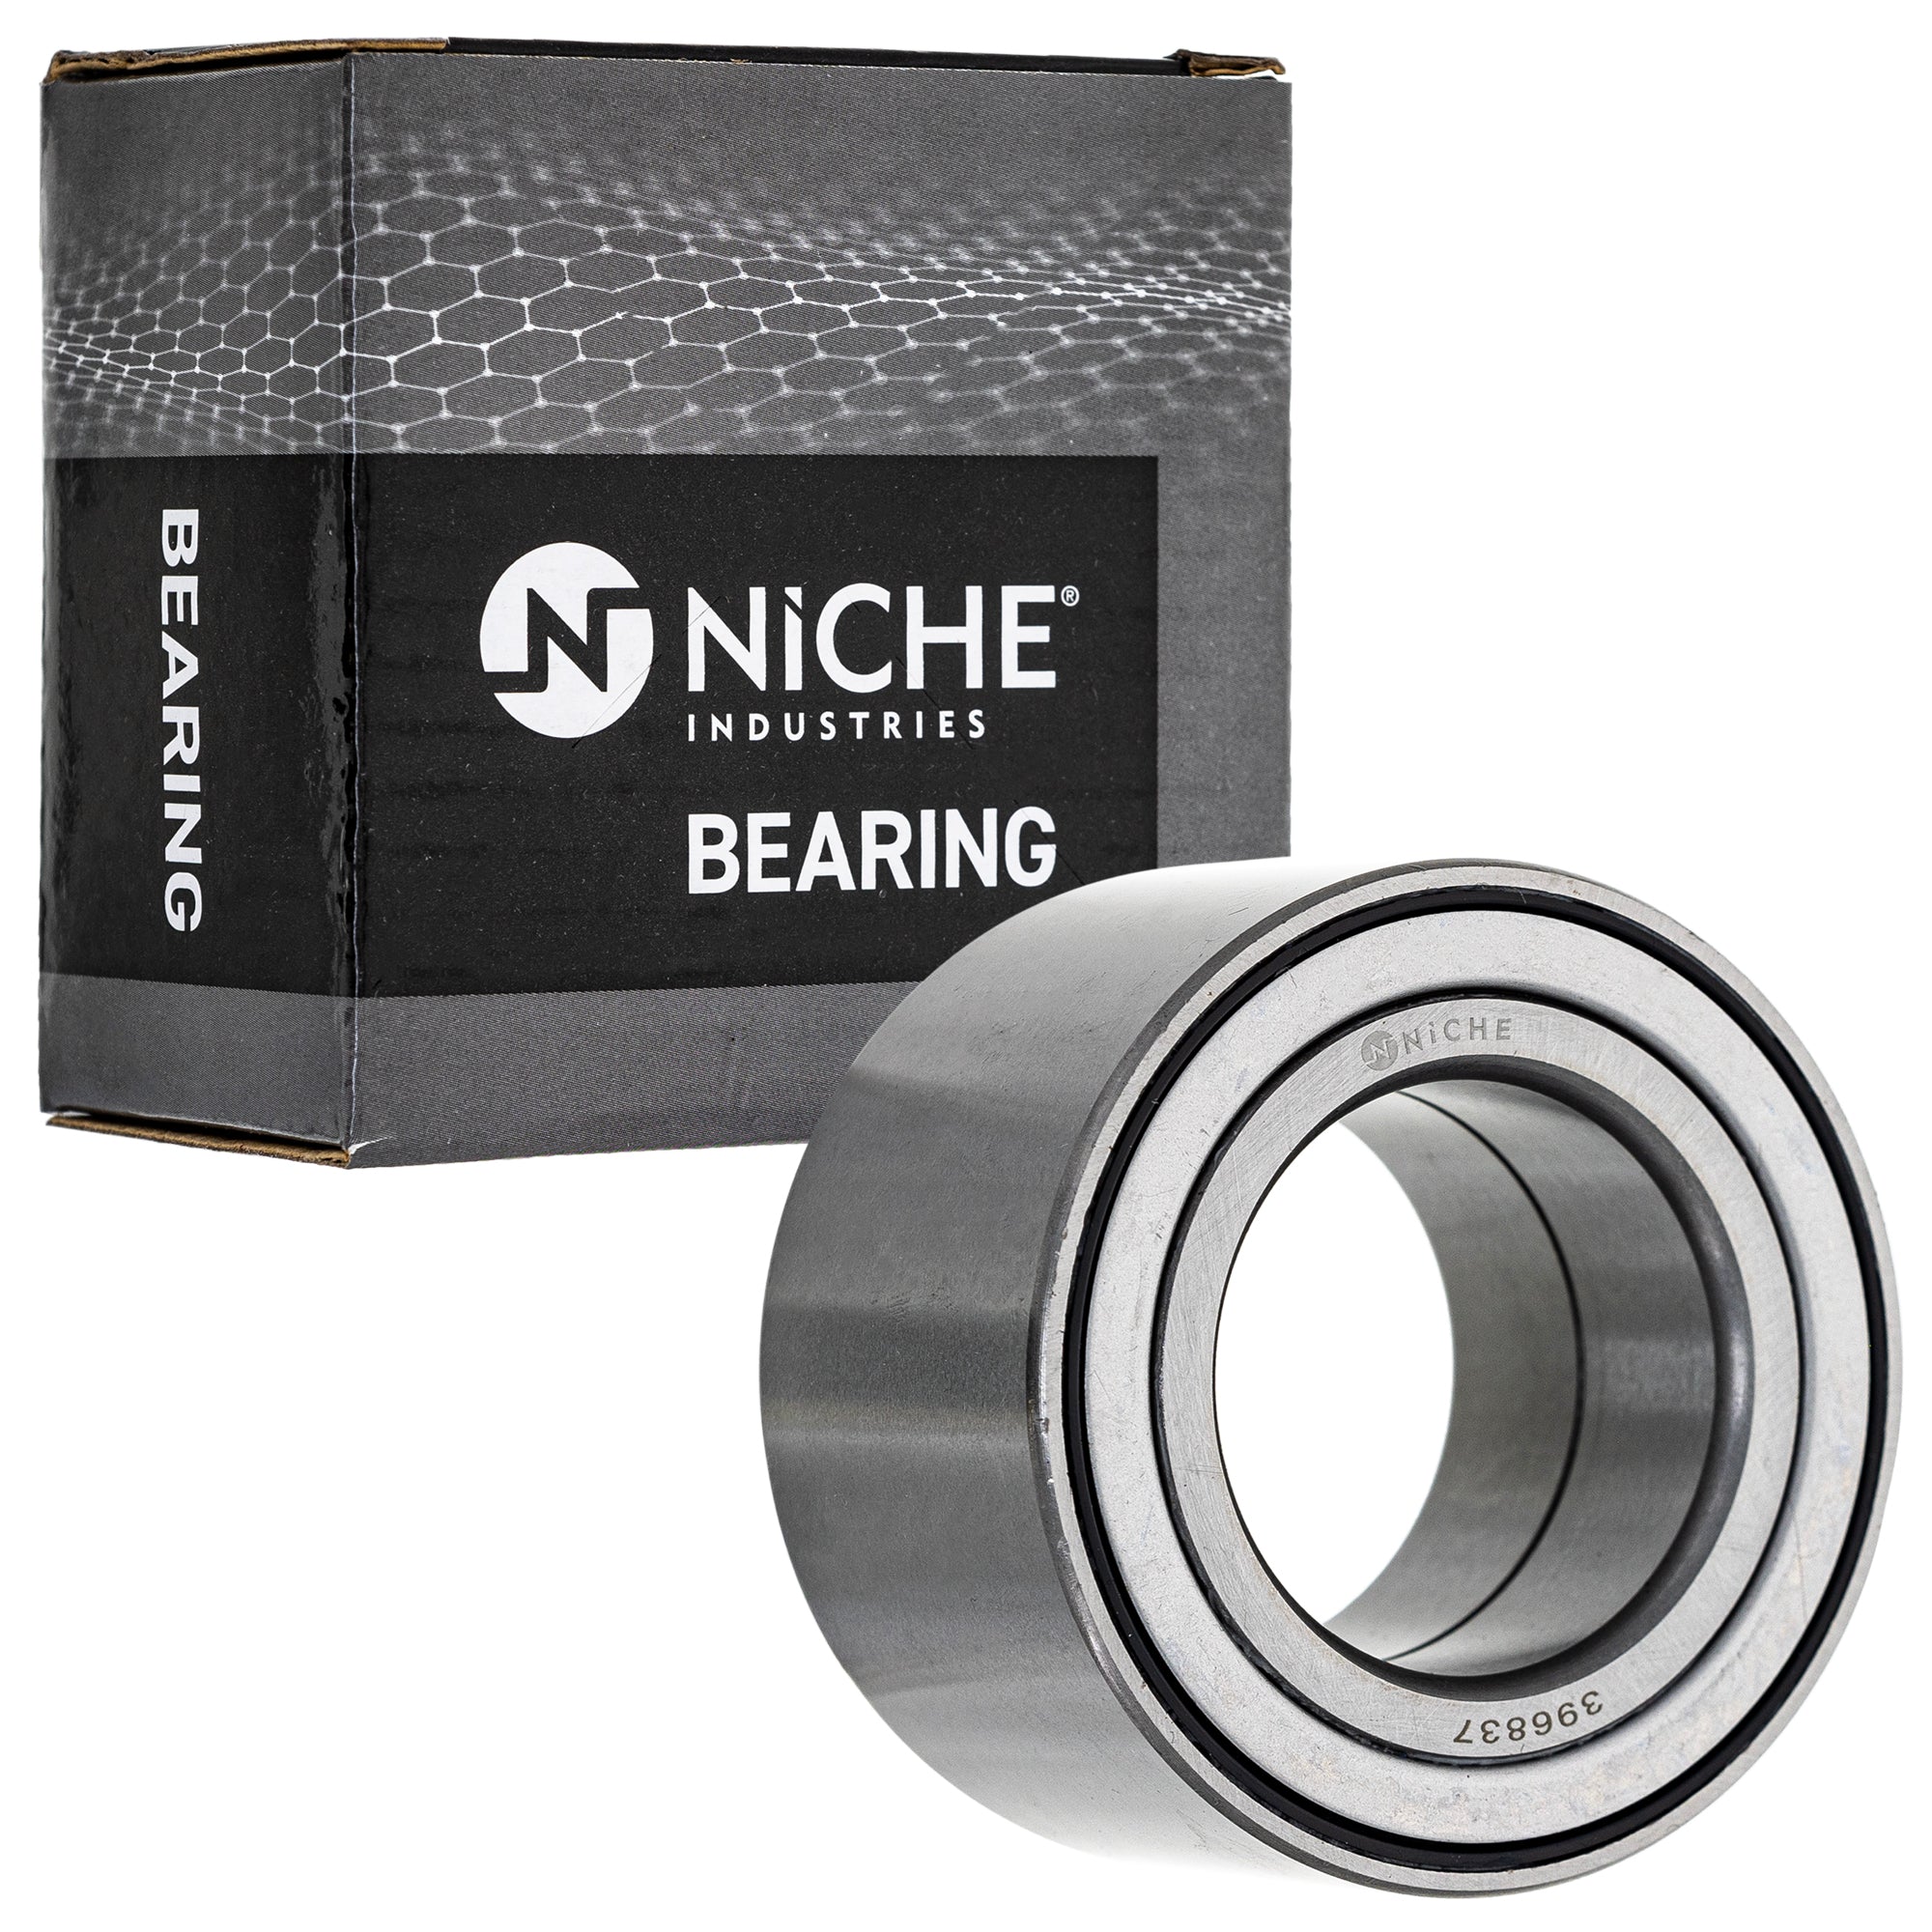 NICHE 519-CBB2204R Bearing 2-Pack for zOTHER